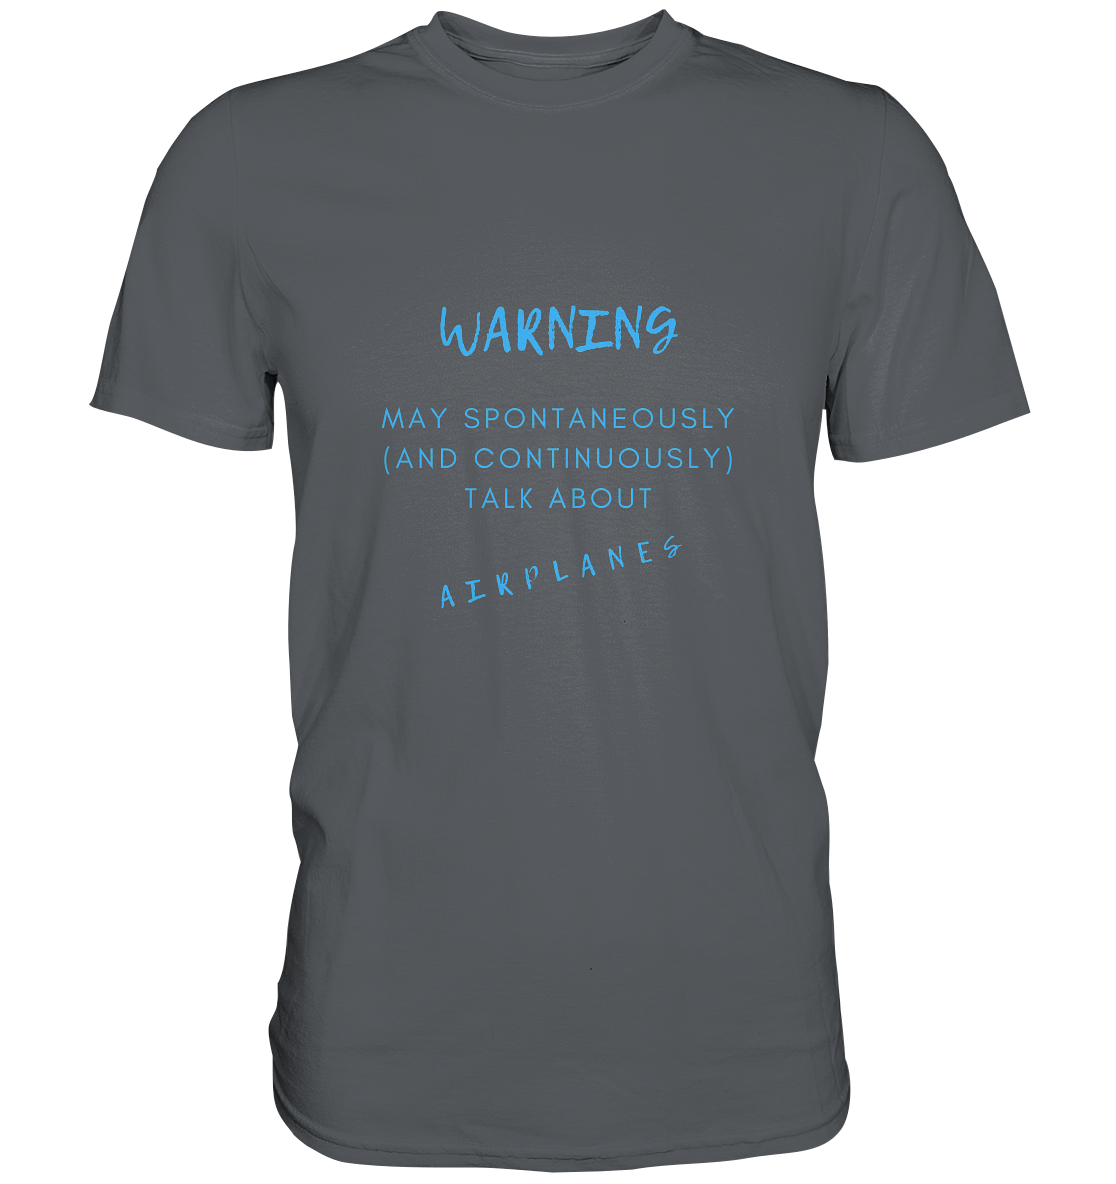 T-Shirt, Herren, men, mit Spruch, with quote "Warning, may continuously talk about airplanes" grau, grey